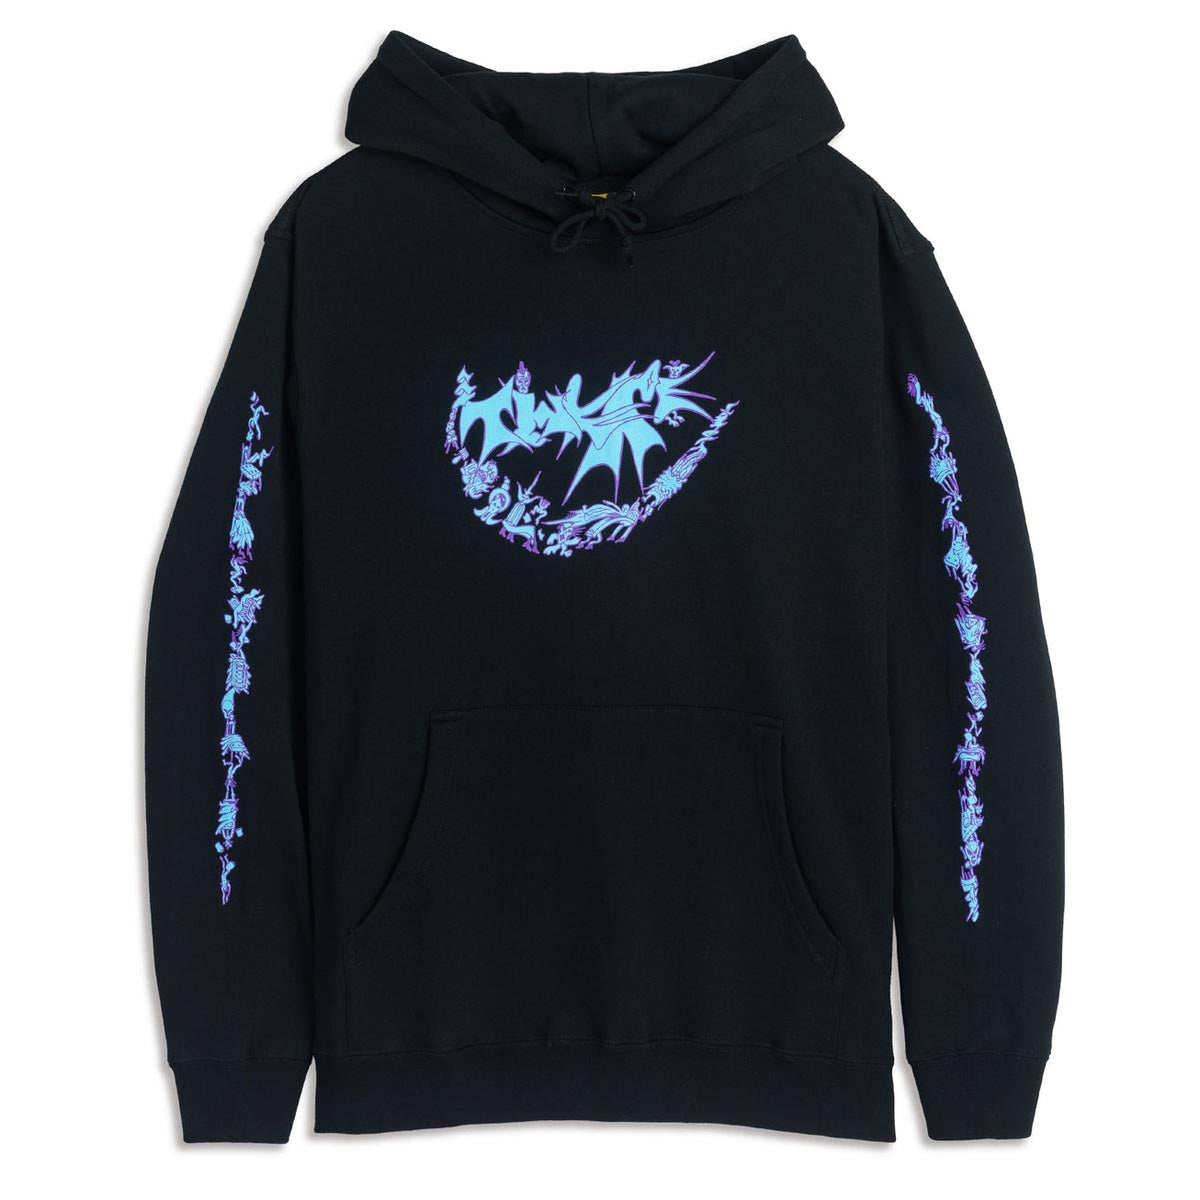 There Midnight Oil Hoodie - Black image 1